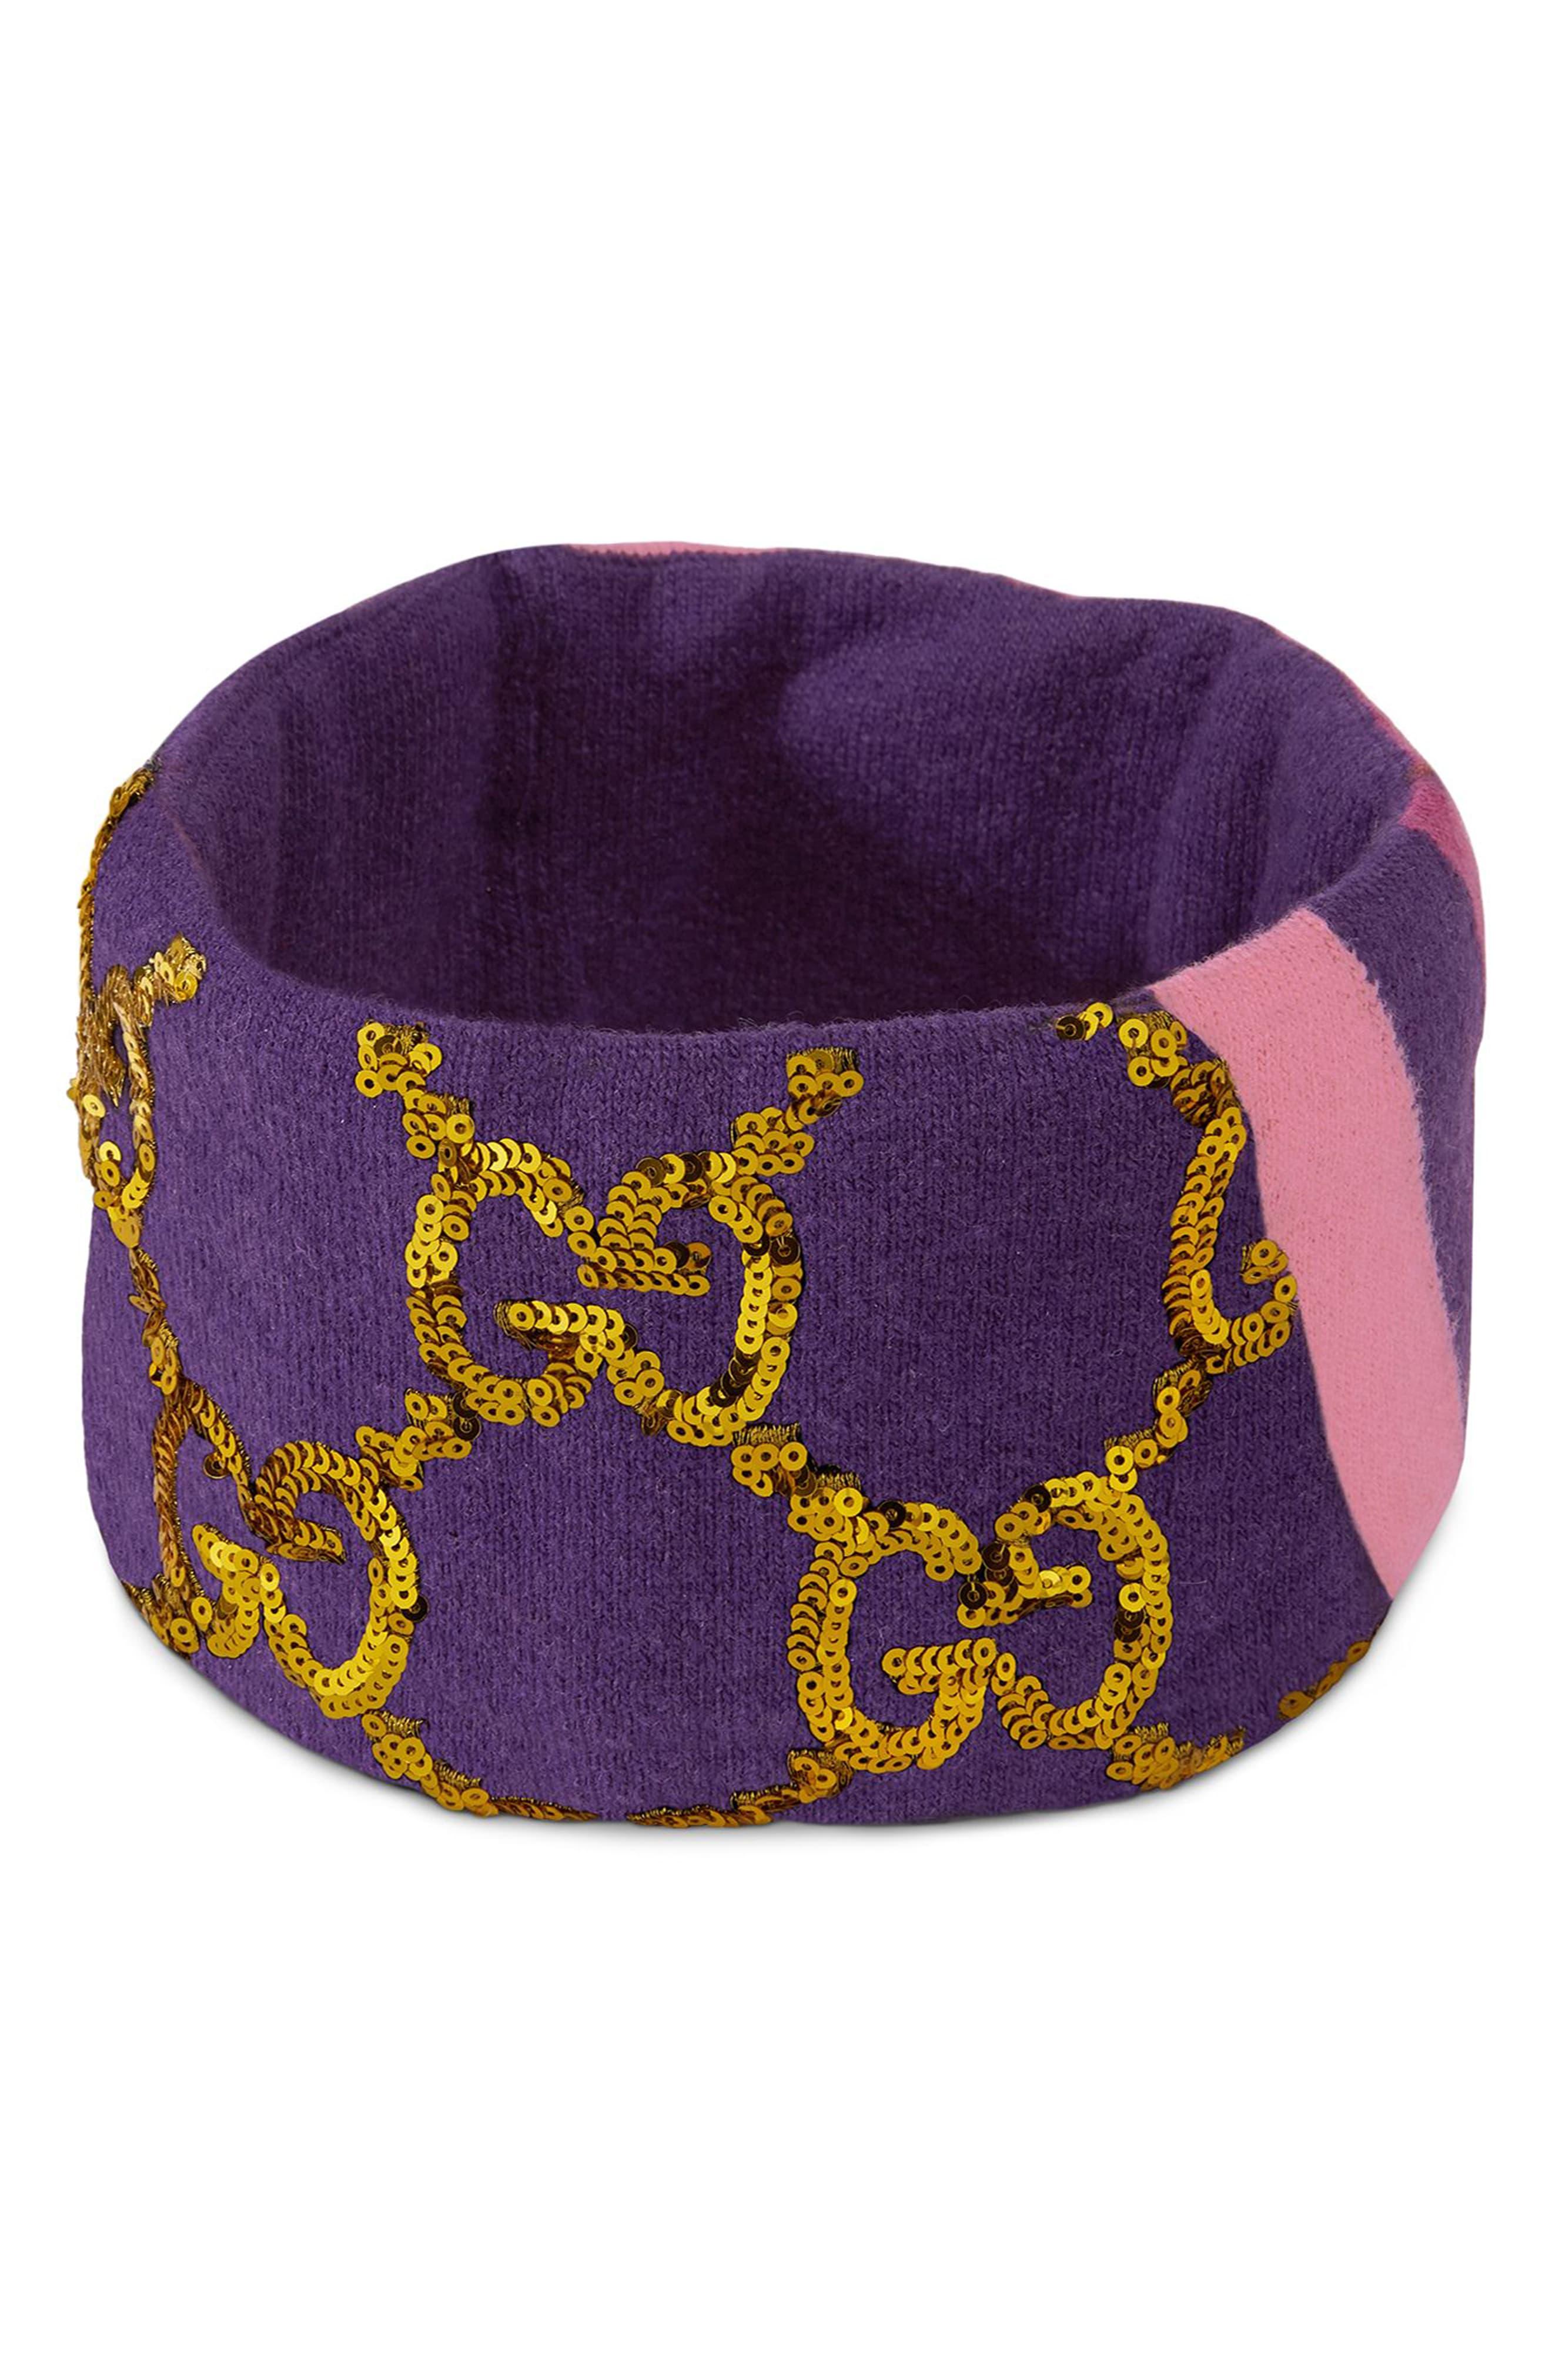 Gucci Wool Gg Sequin Headband in Parma 